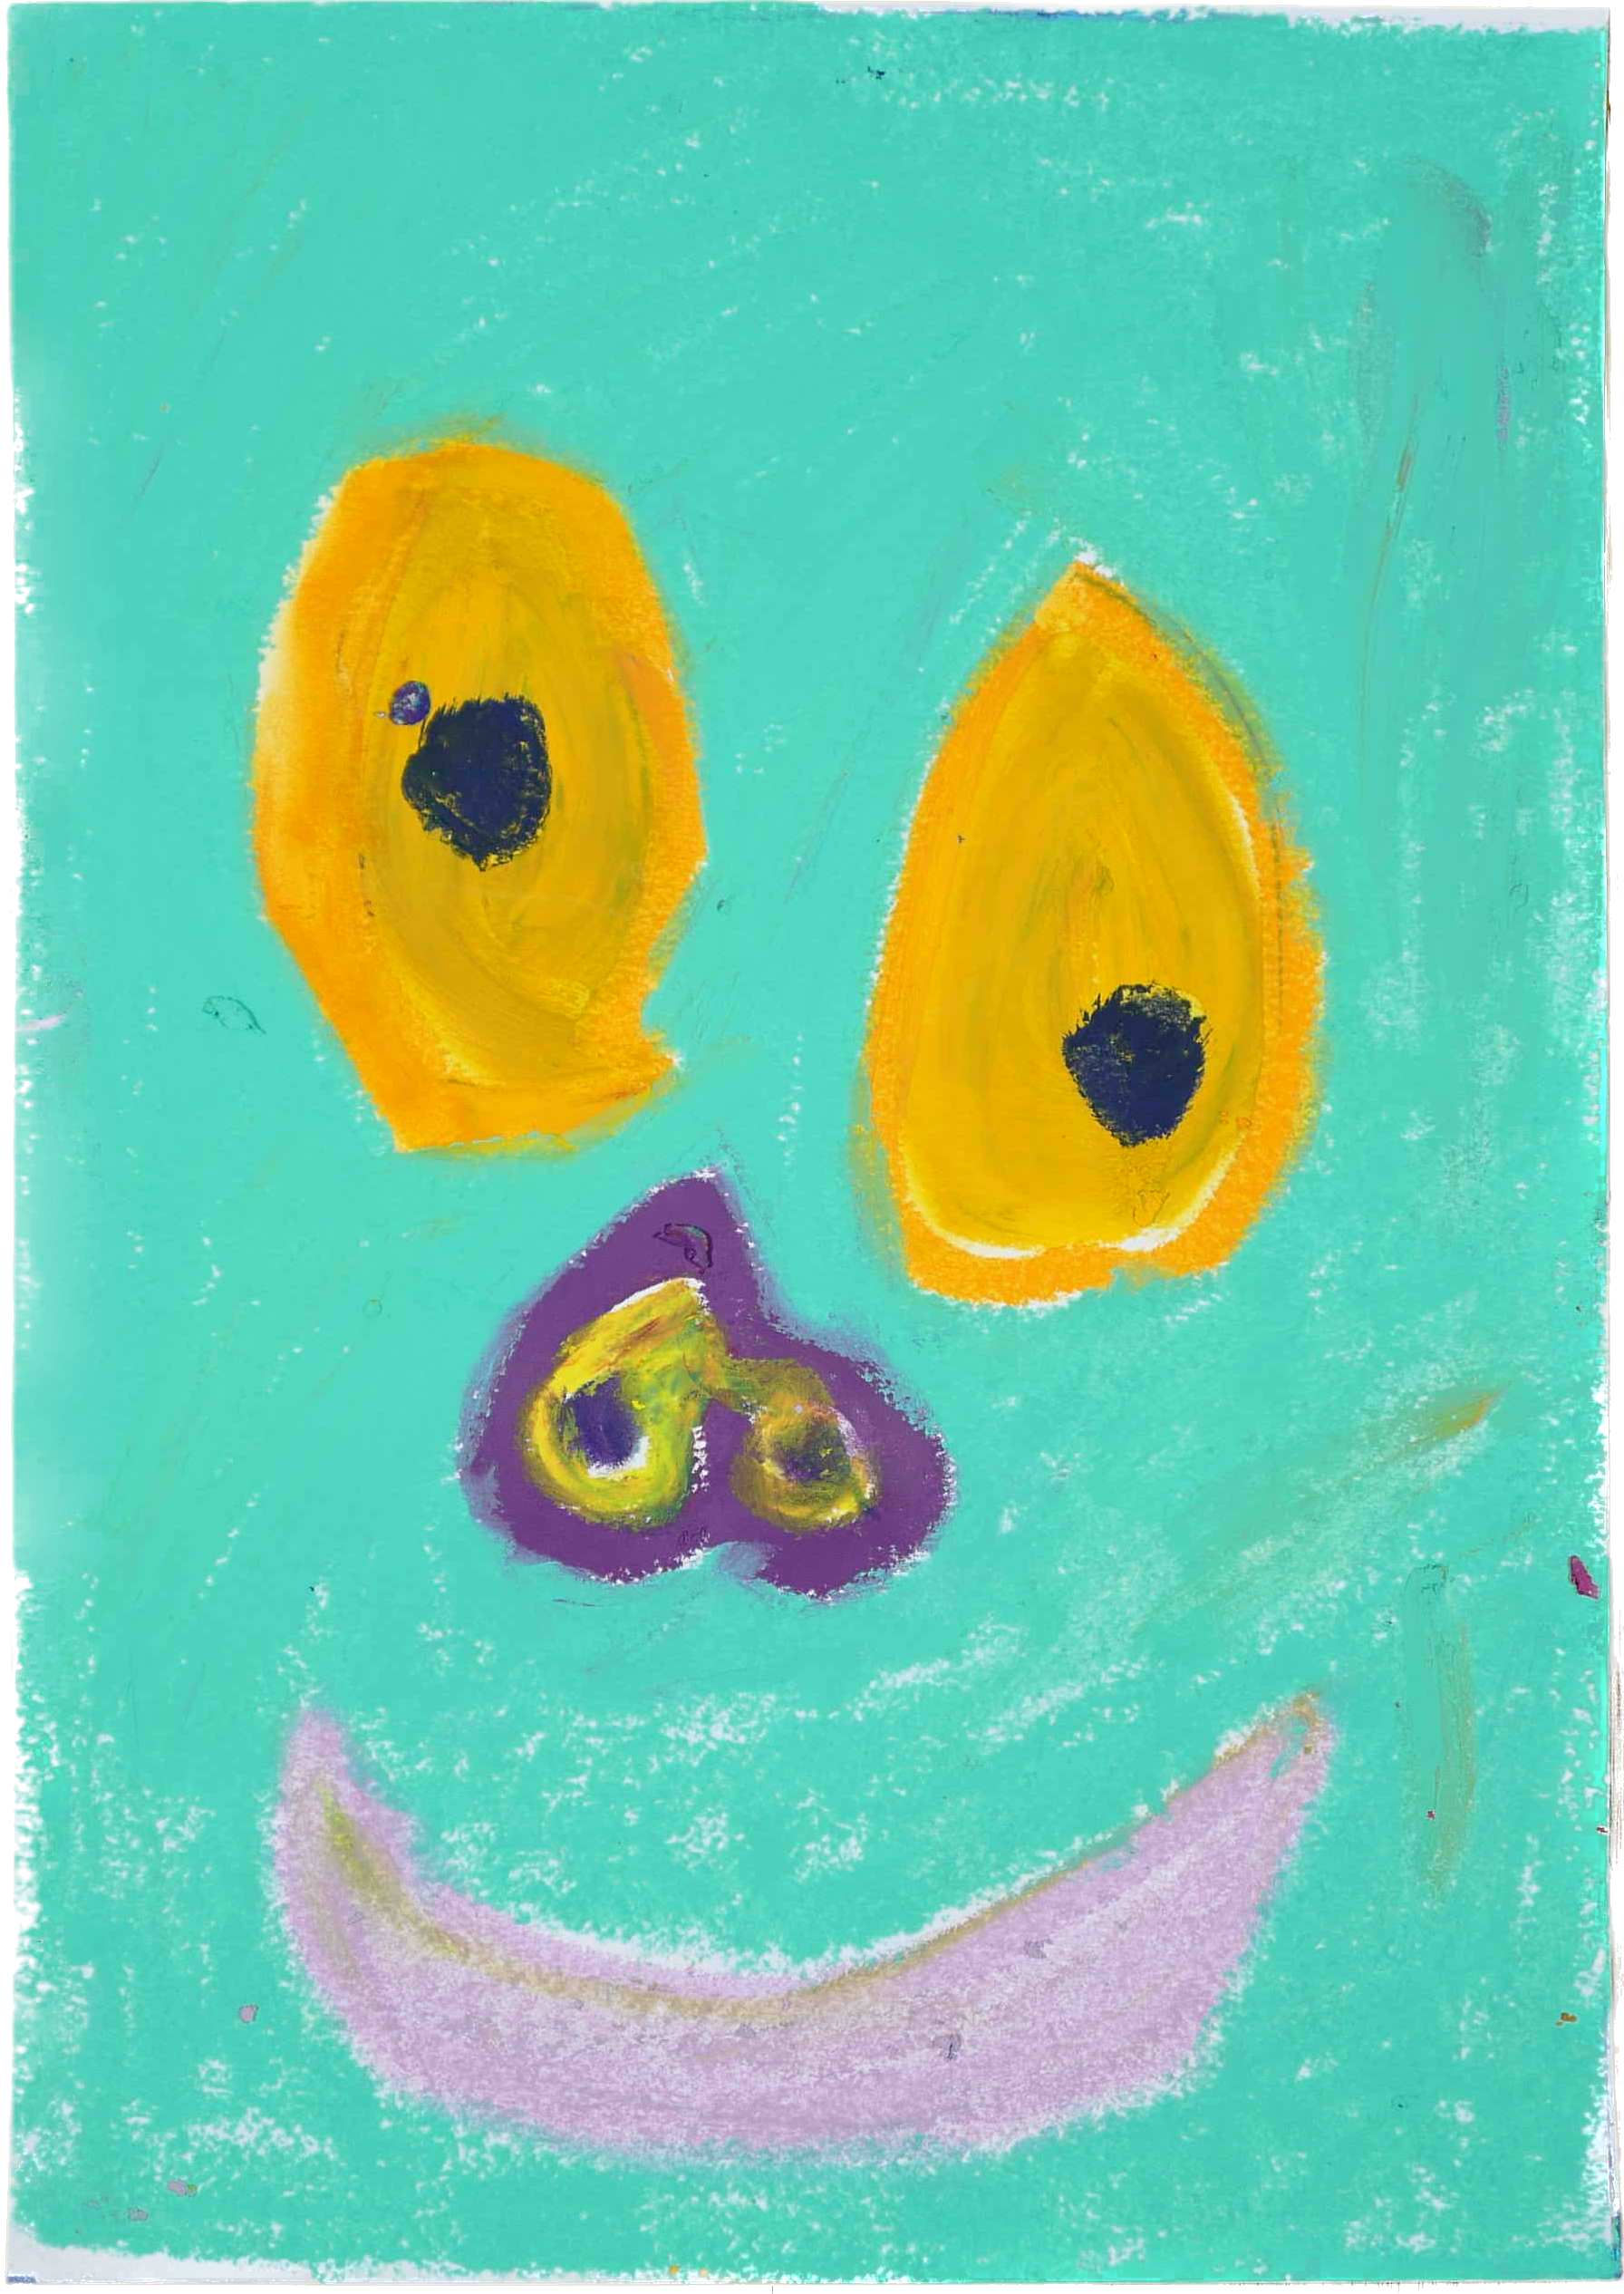 "Lenfantvivant luminous abstract art" "Spectrum soul in vibrant pastels" "Sauna Fusion Series abstract face" "Contemporary radiant abstract artwork" "Luminous stare in expressive art form"